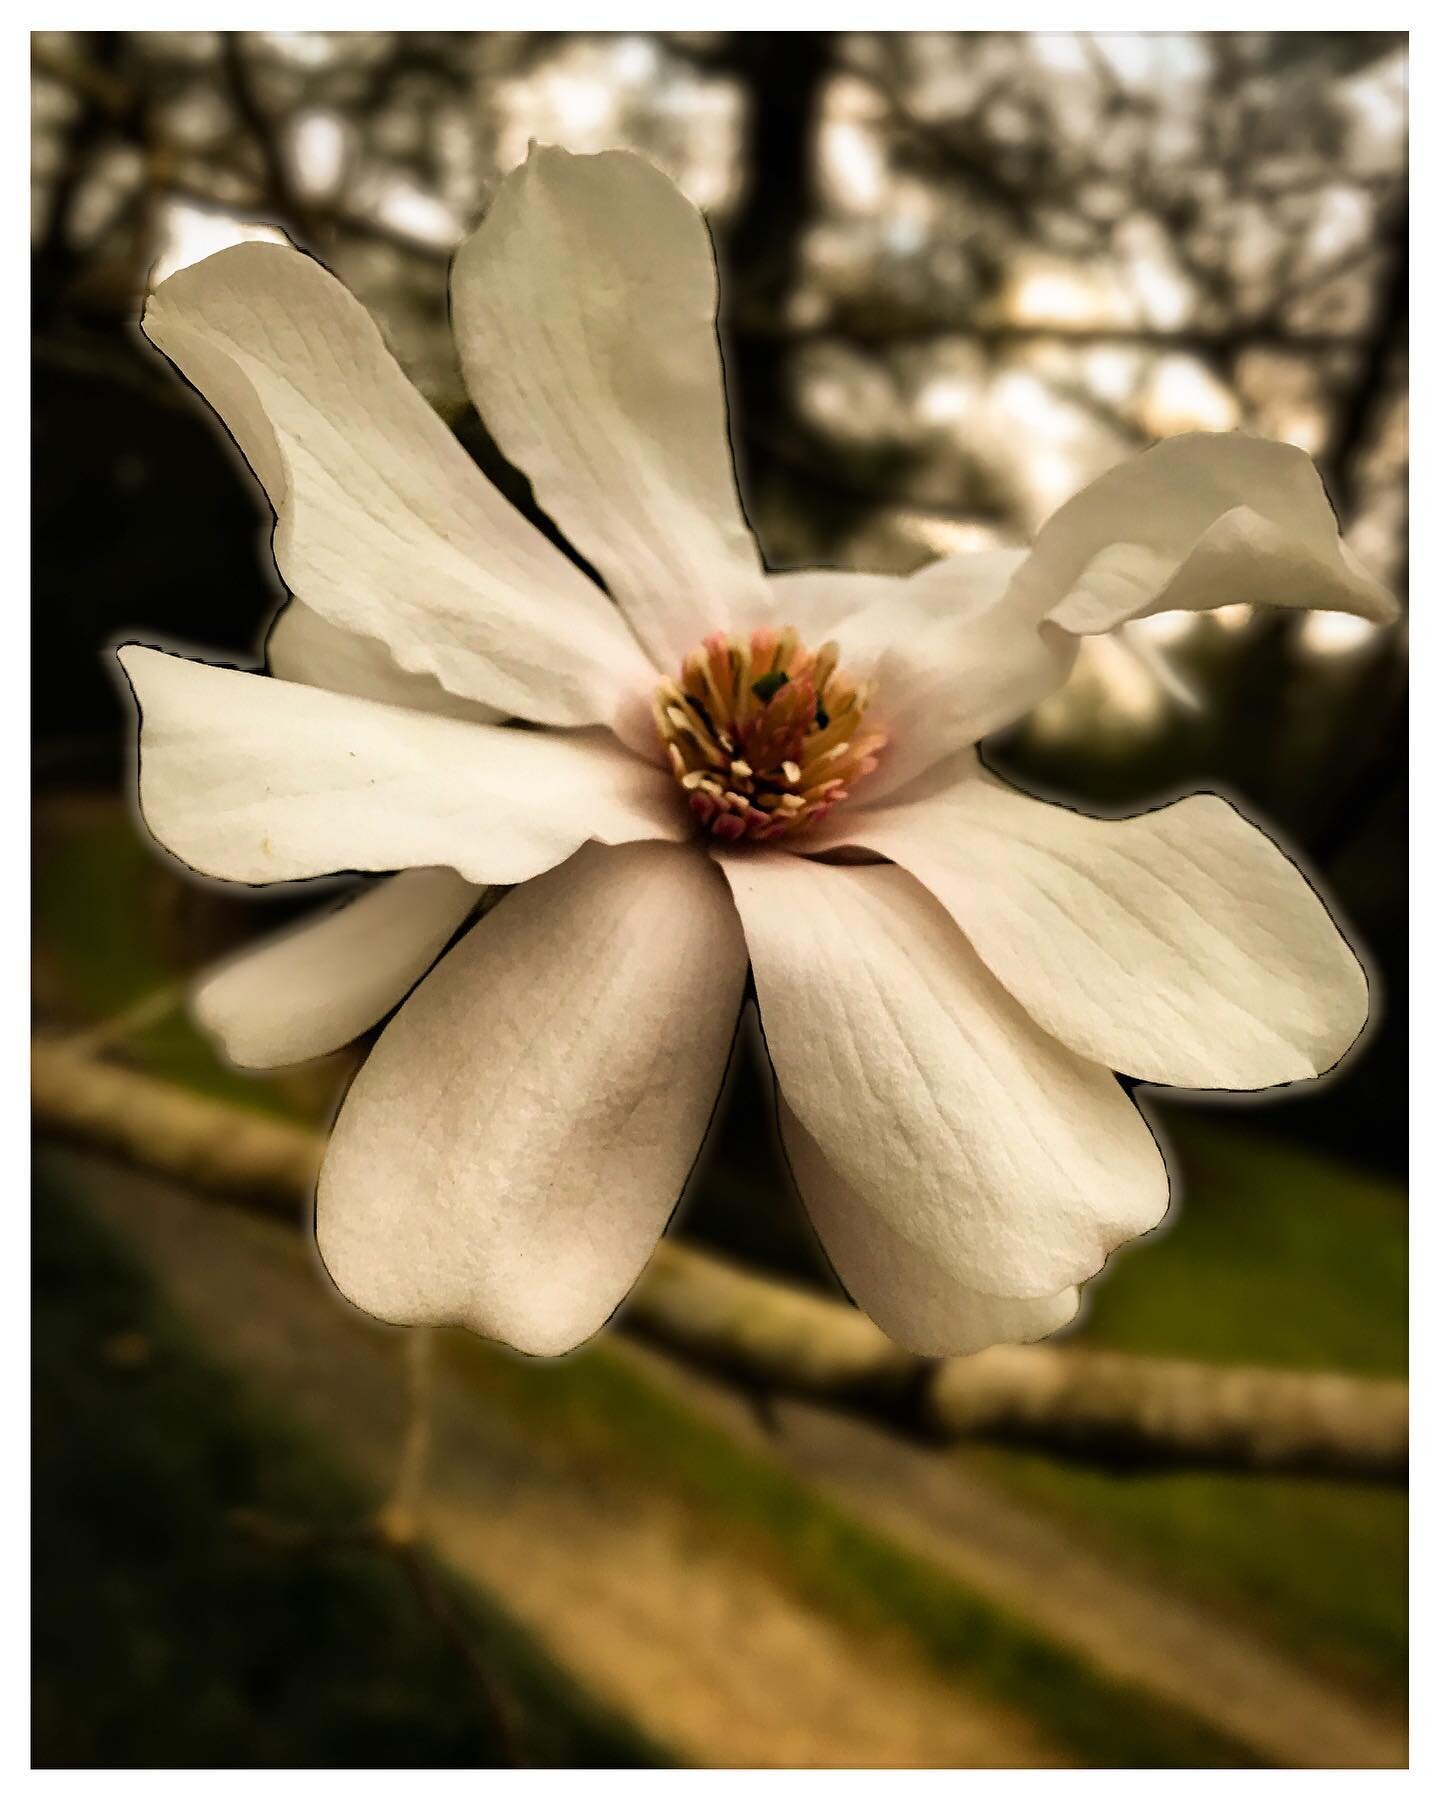 Our Native Magnolia is blooming crazy-early this year. Praying for an early Spring or we&rsquo;ll lose lots of blossoms. #climatechange #weather #nature #louisiana